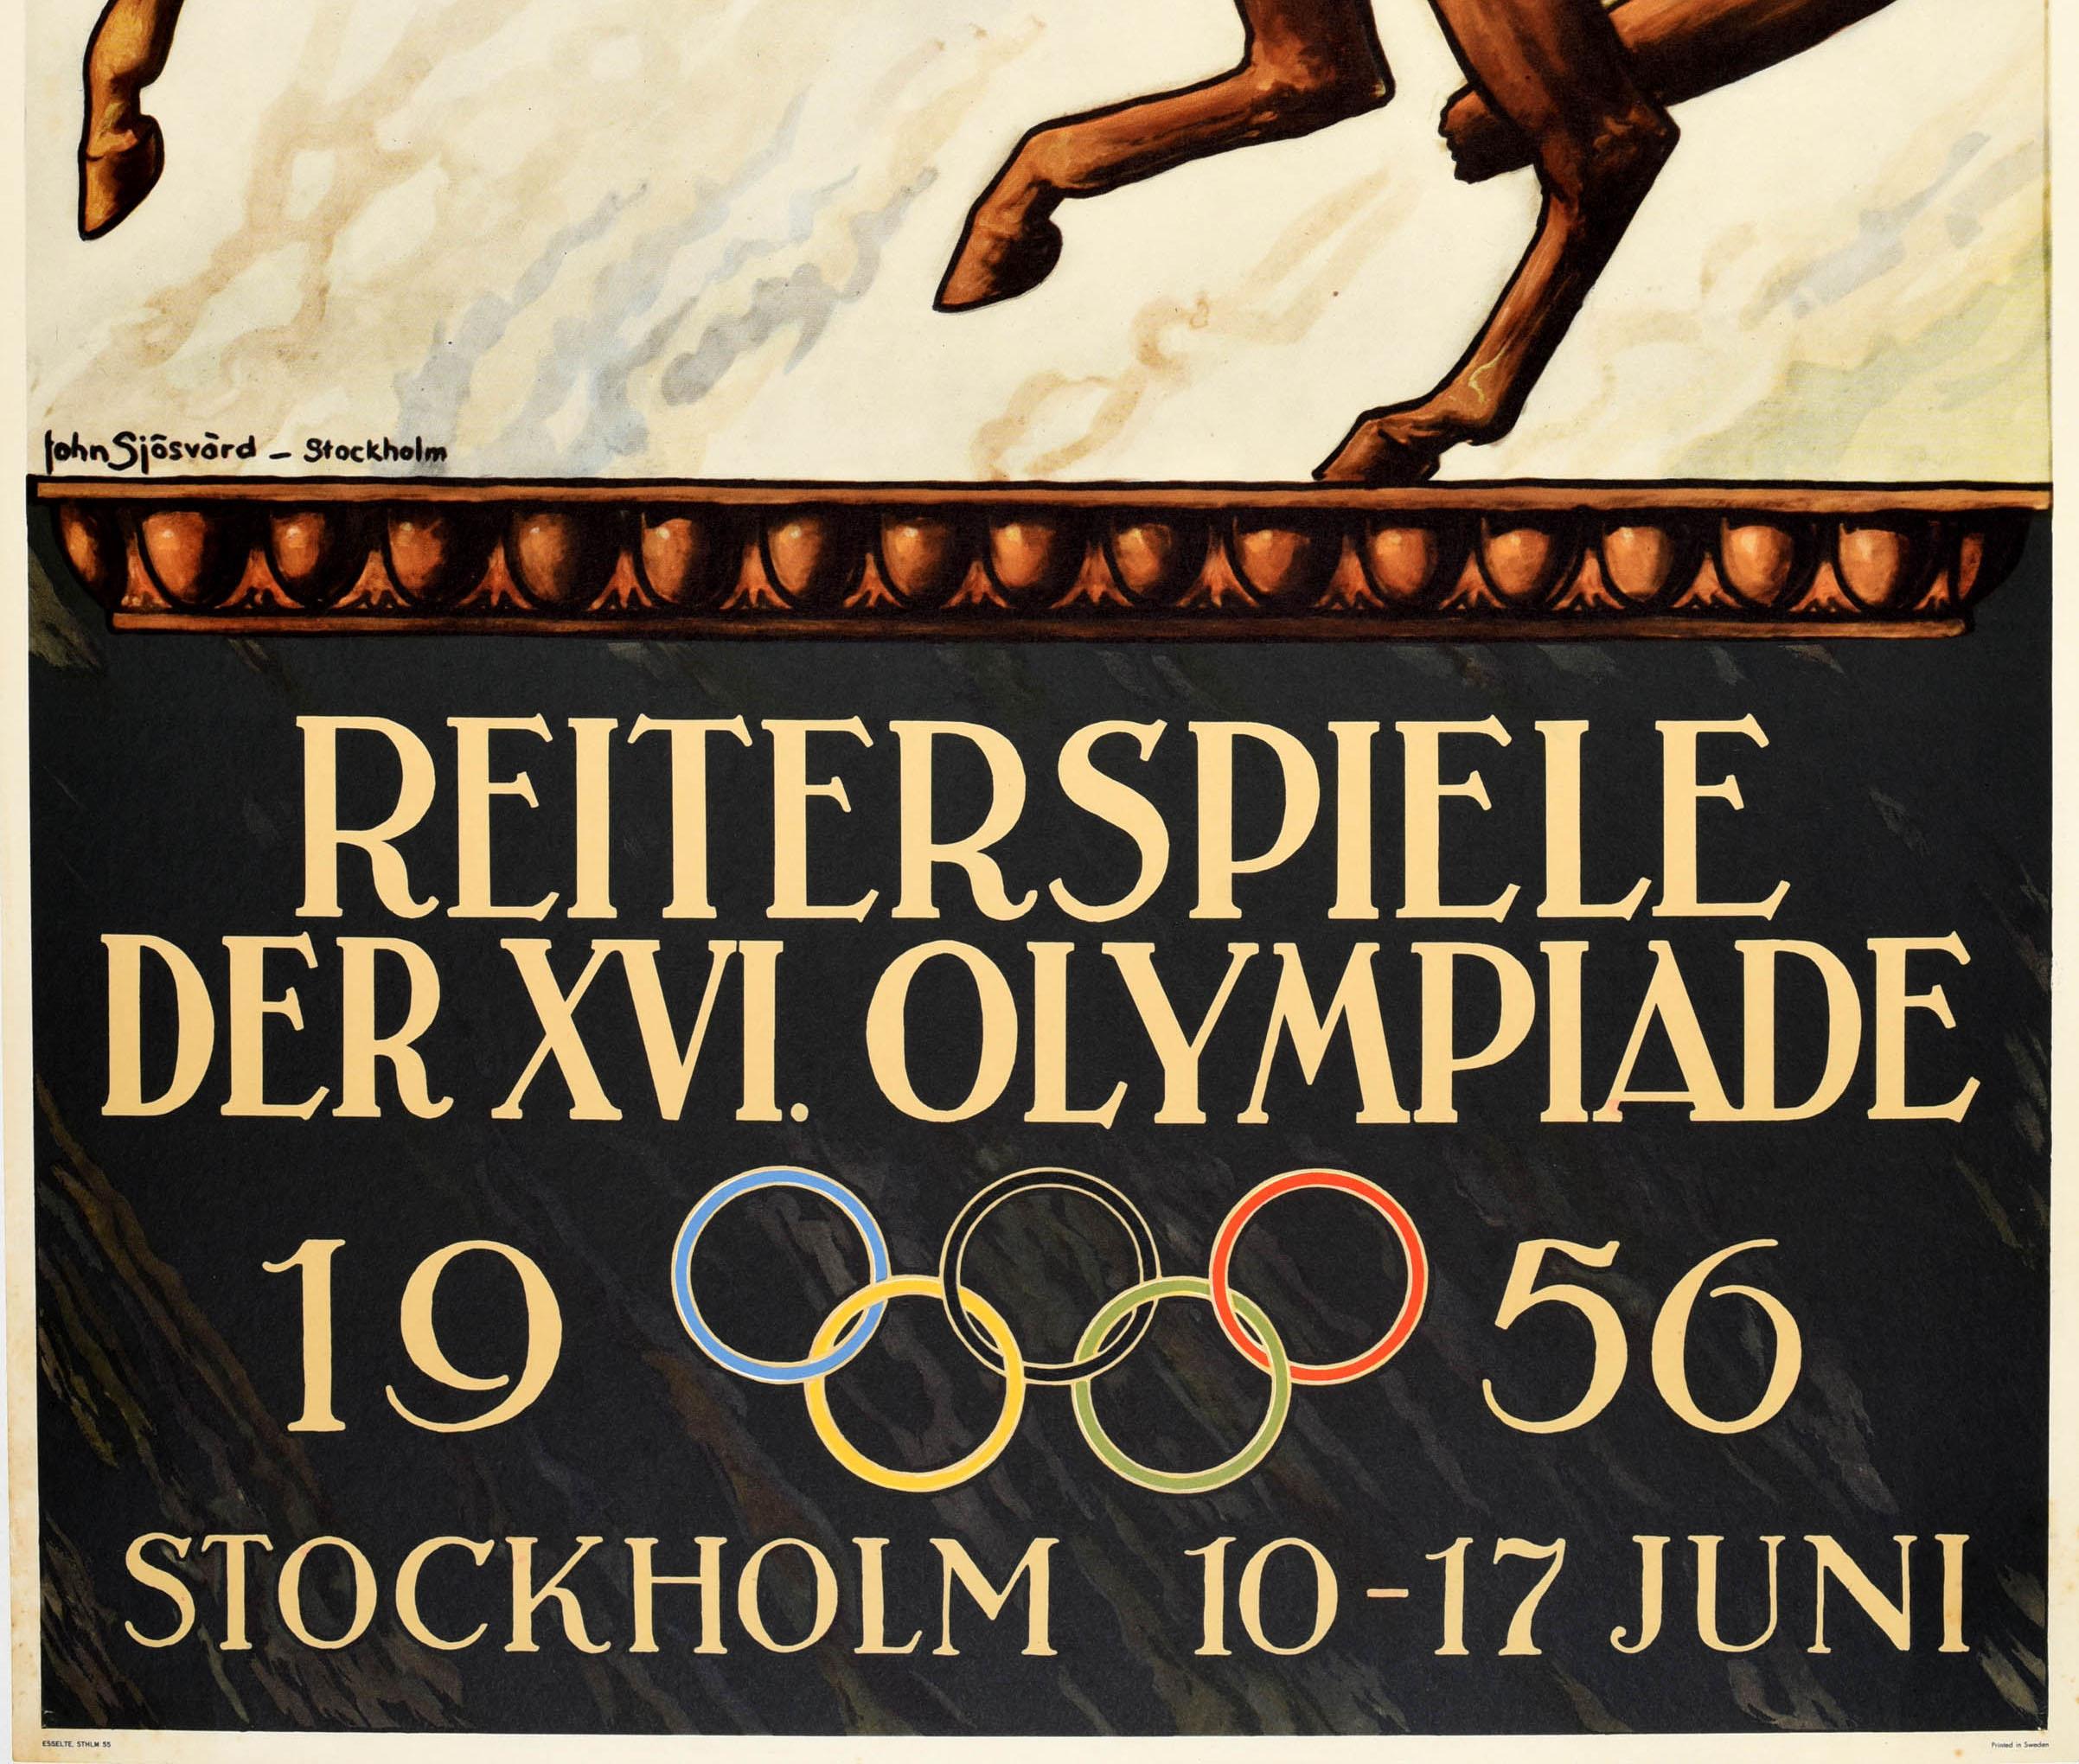 Original vintage sport poster for Equestrian Games of the XVI Olympics 1956 / Reiterspiele Der XVI Olympiade hosted by Stockholm from 10 to 17 June 1956 for the dressage, eventing (dressage, cross-country and show jumping), and show jumping events